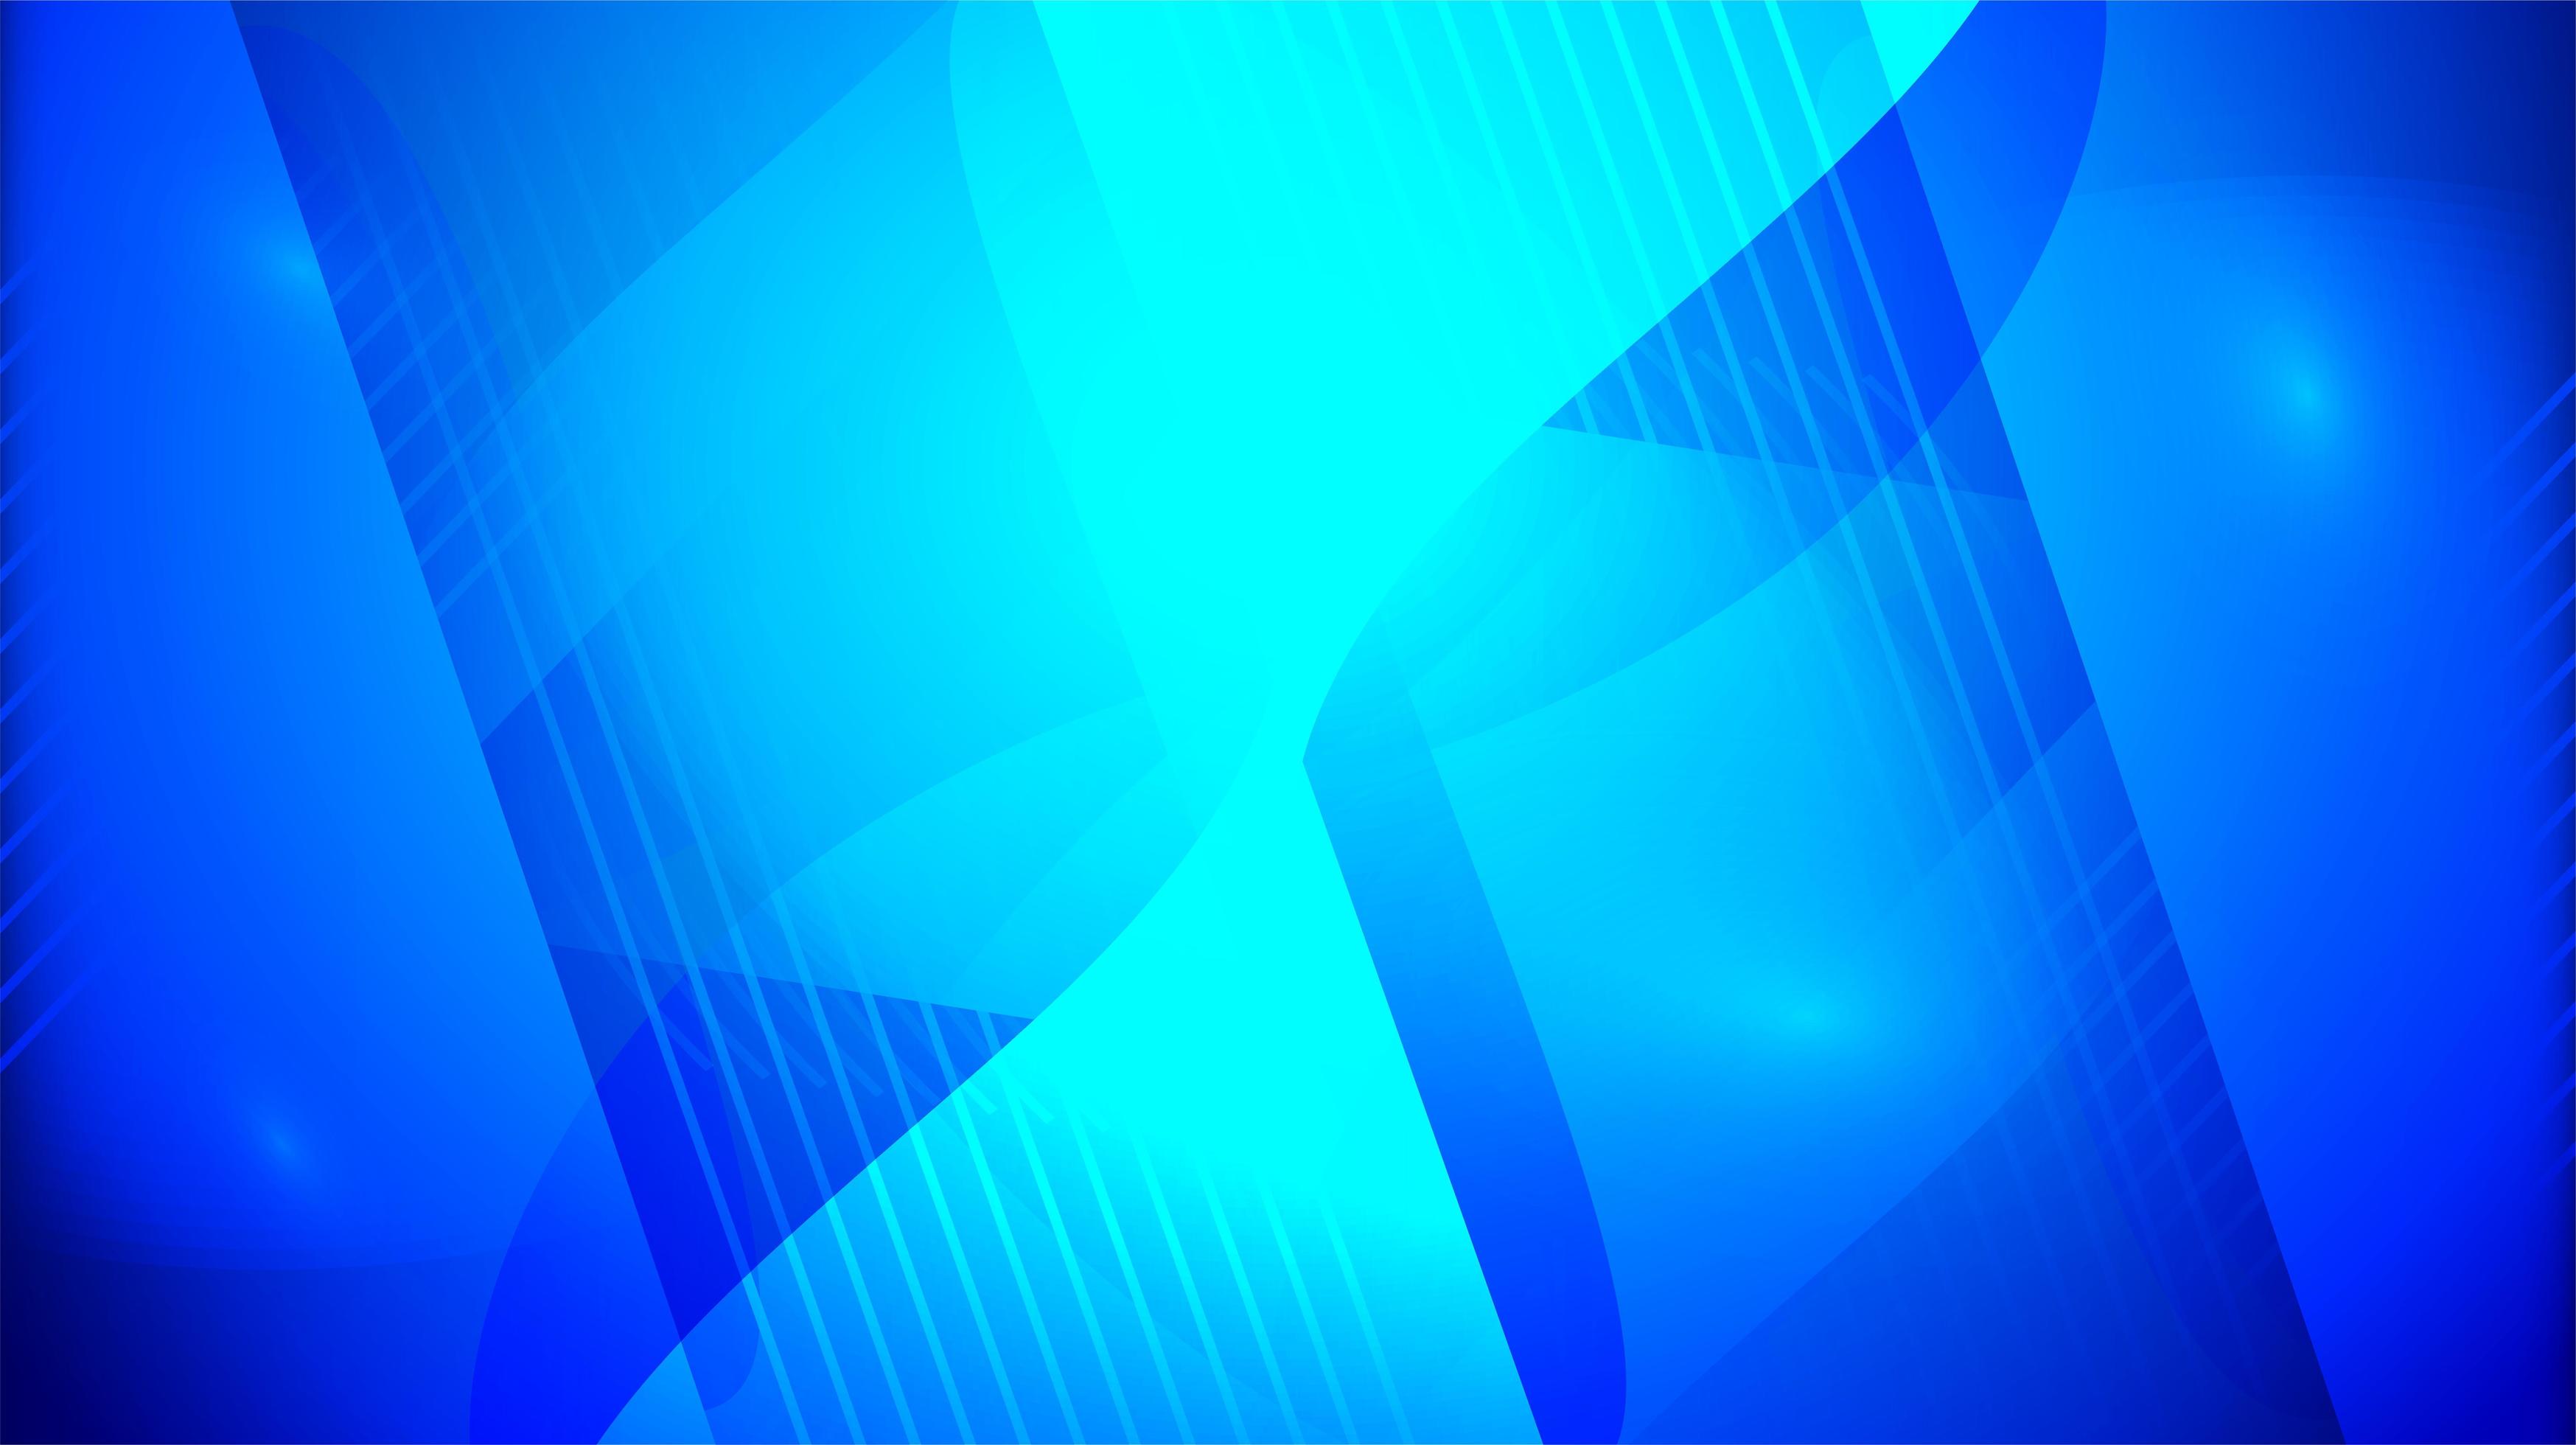 Blue Backgrounds, Images & Wallpapers- Download for Free